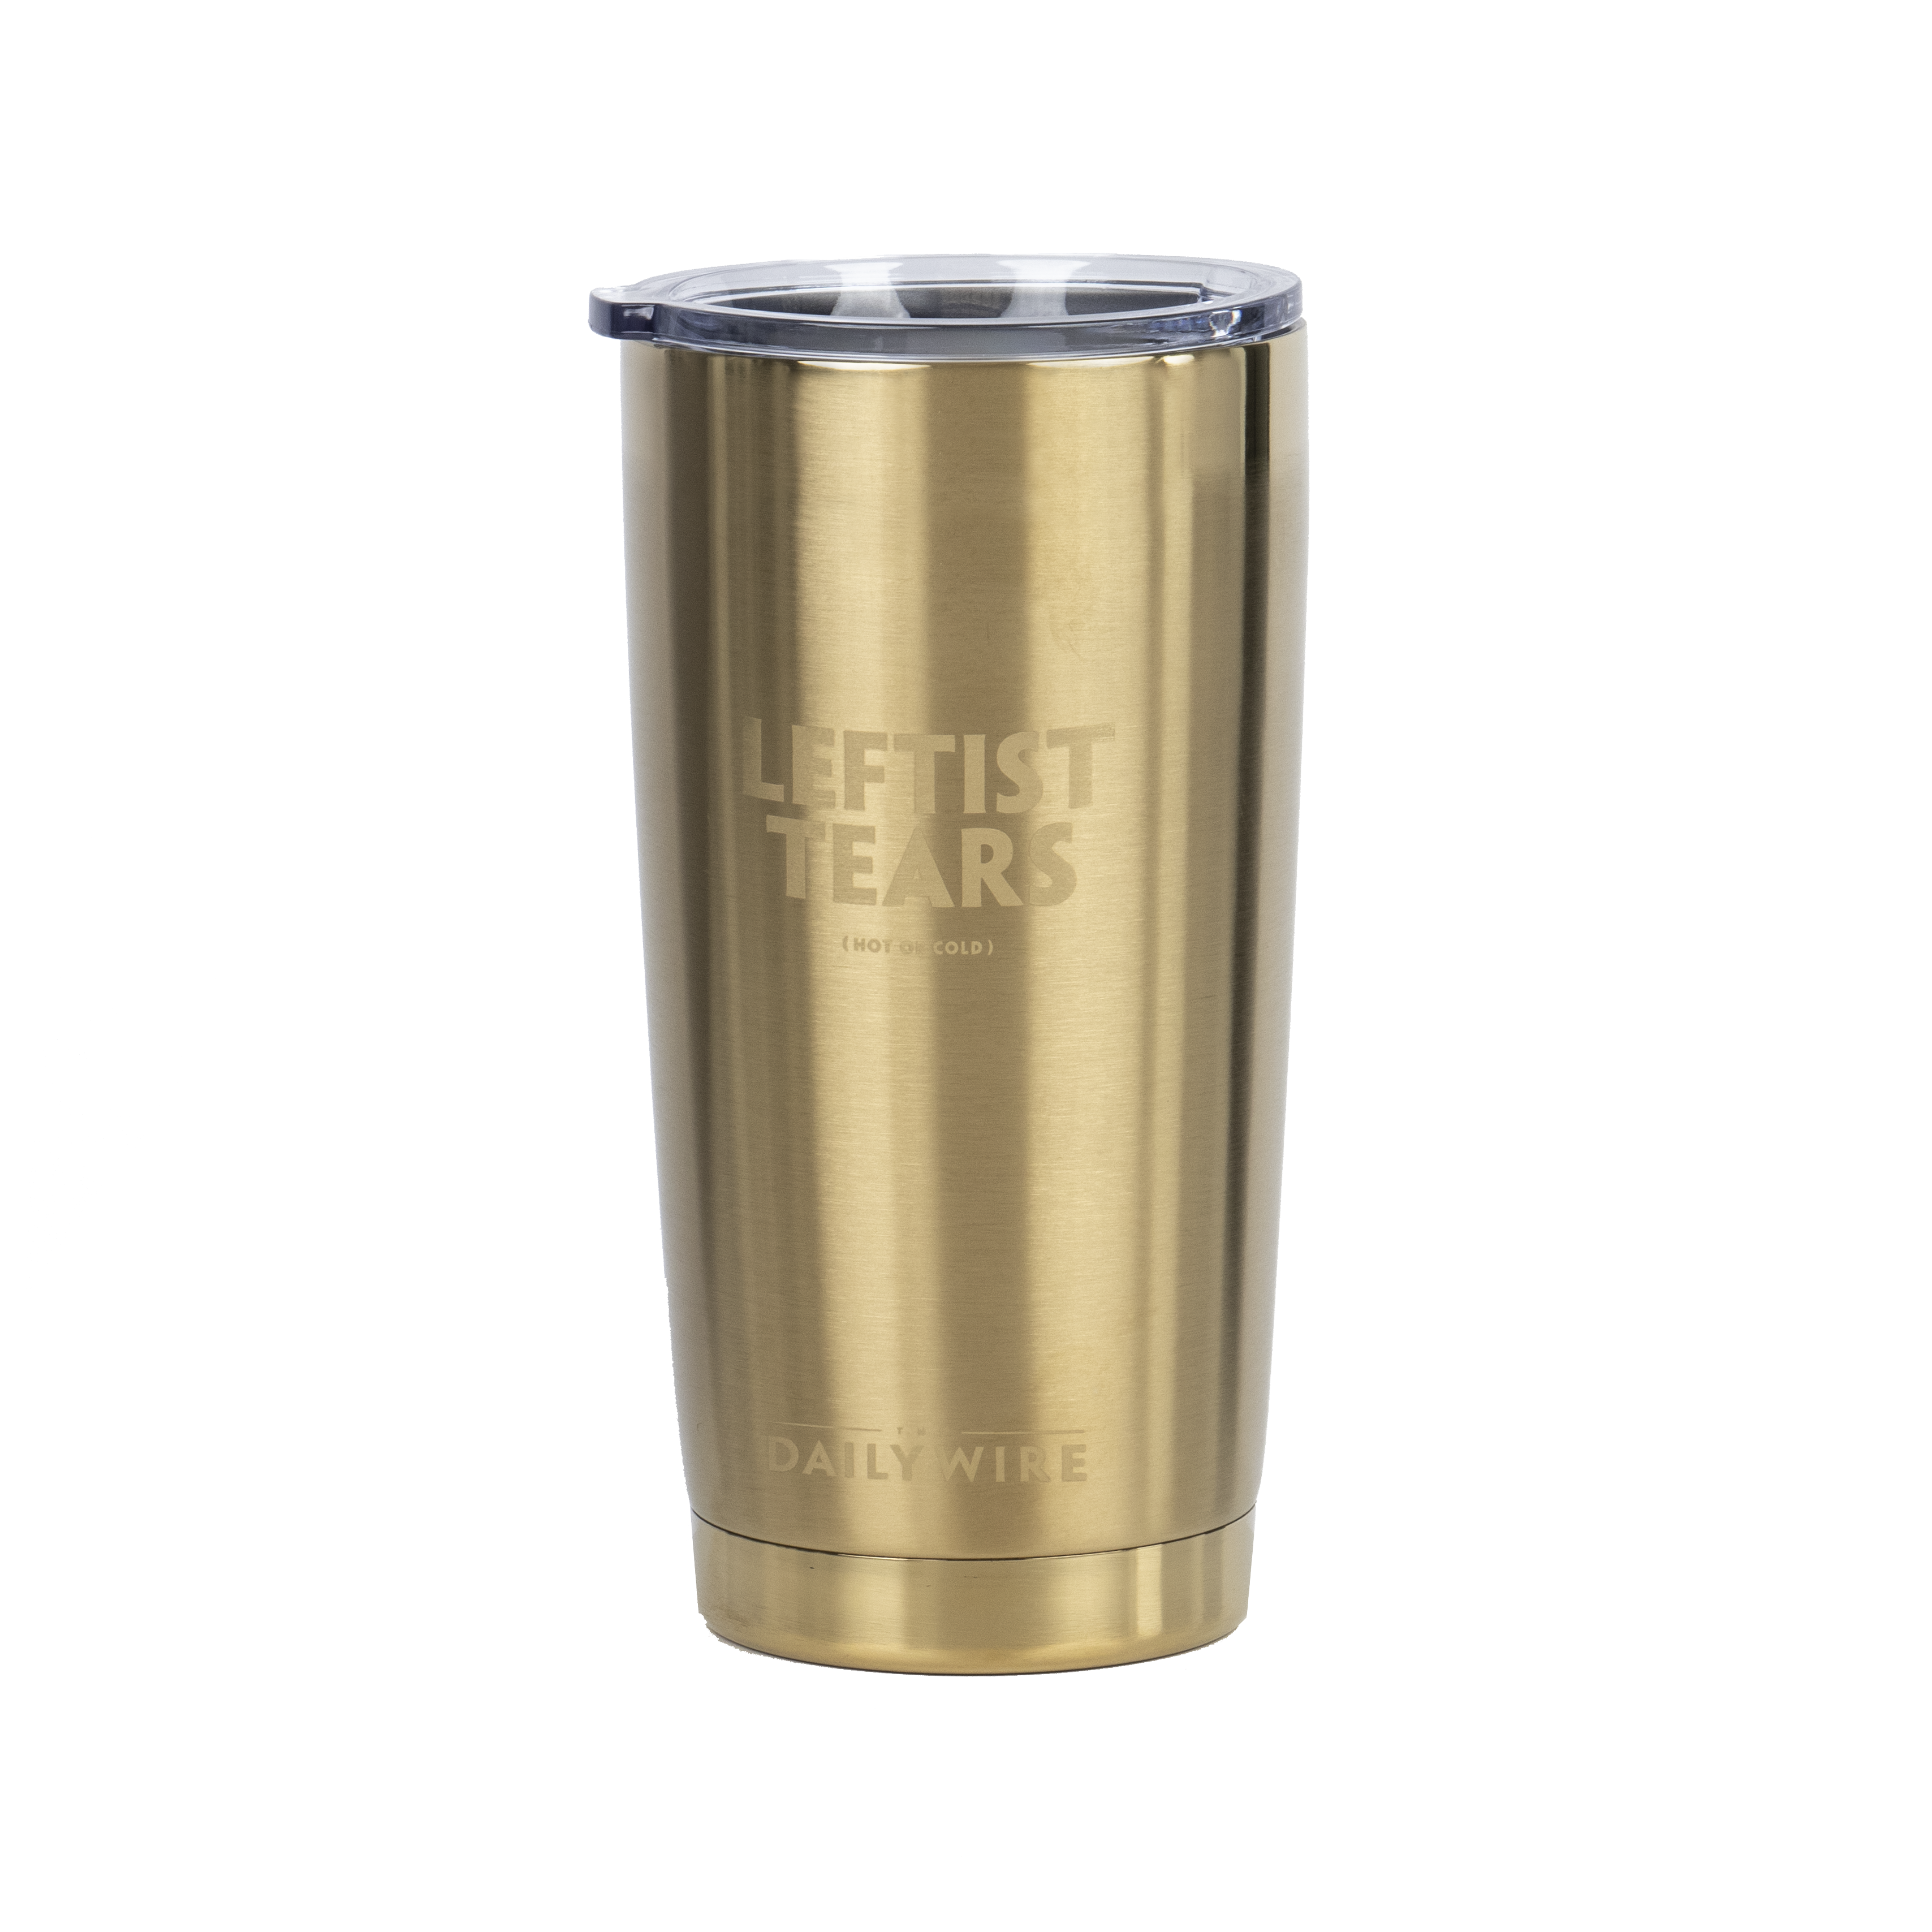 Gen Z's obsession with the Stanley Tumbler is crashing, trend